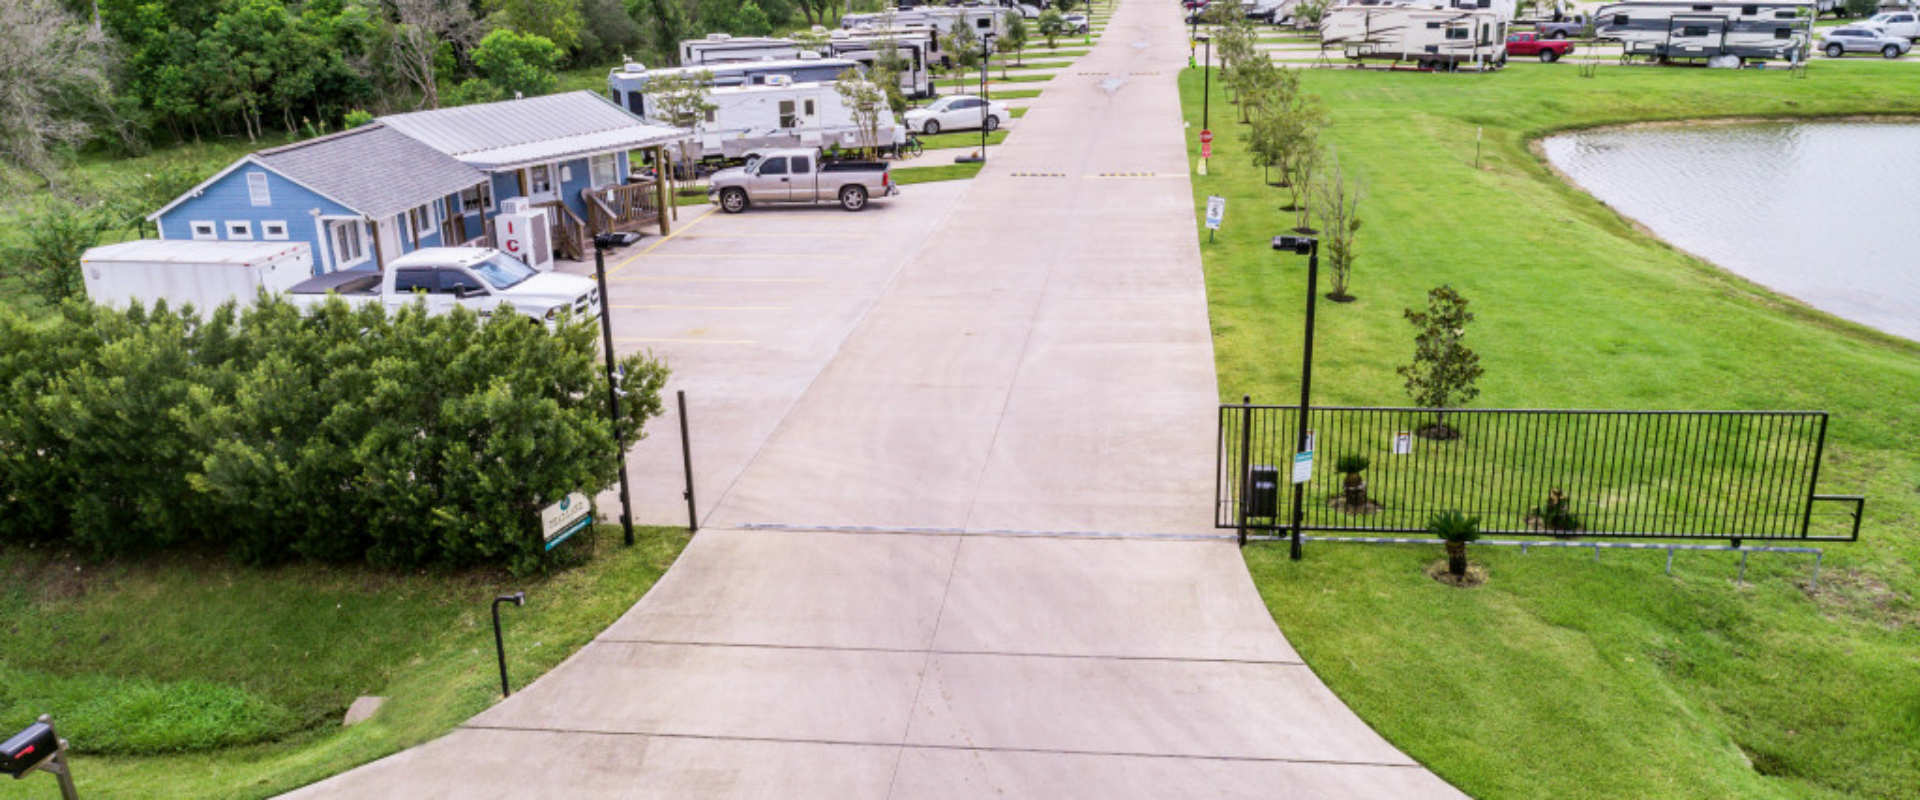 RV Park with gated entrance, lush green grass and many parking spaces.